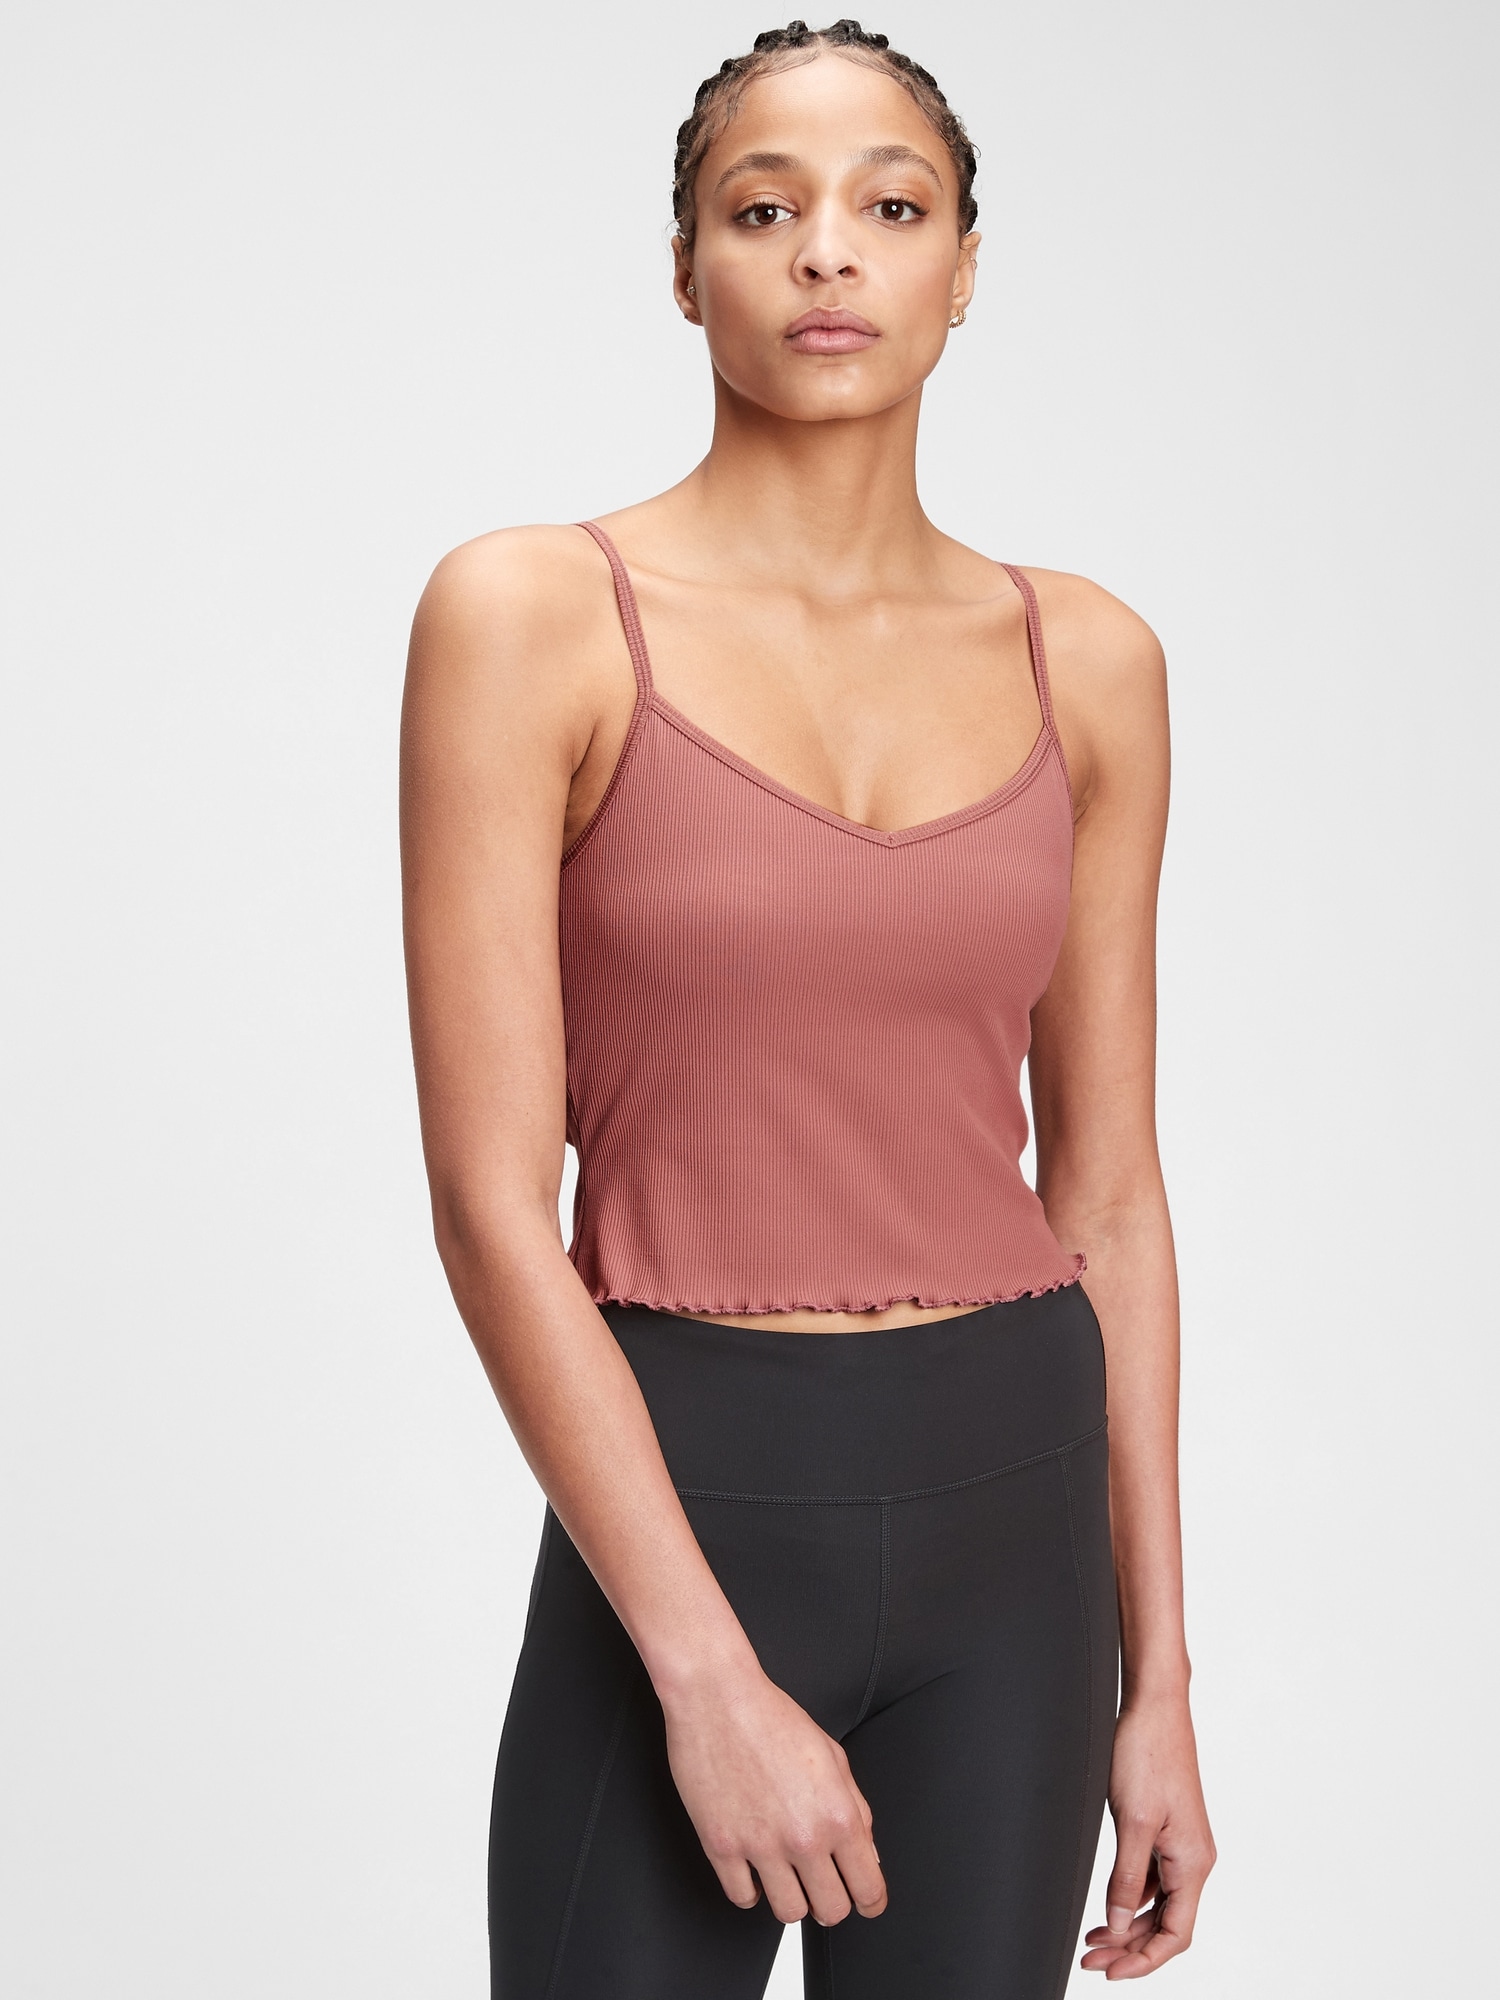 gvdentm Camisoles With Built In Bra Wireless Bra, Full-Coverage